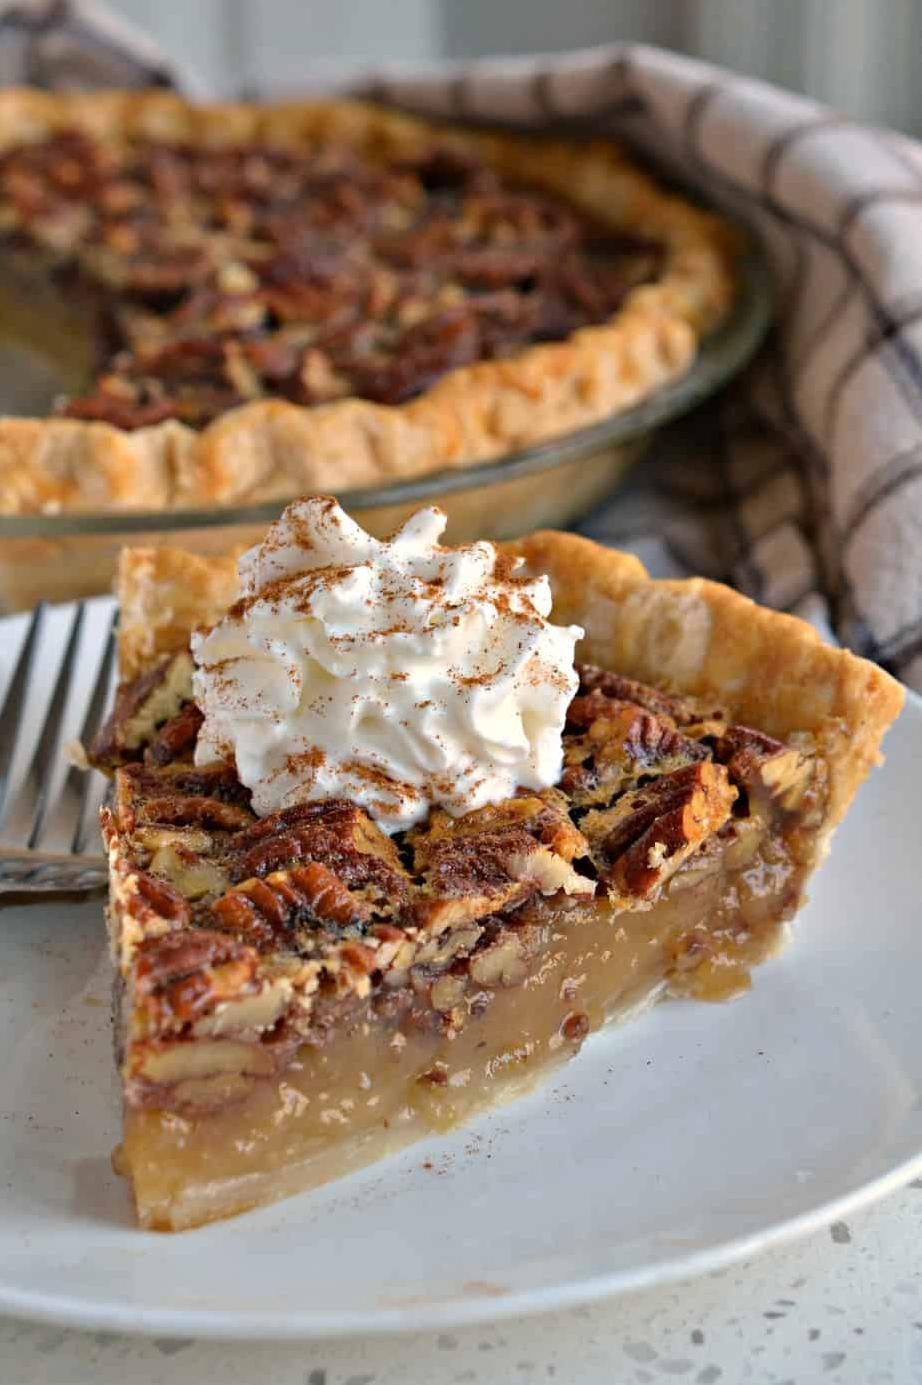  Nothing beats the rich and buttery taste of pecans in this pie.